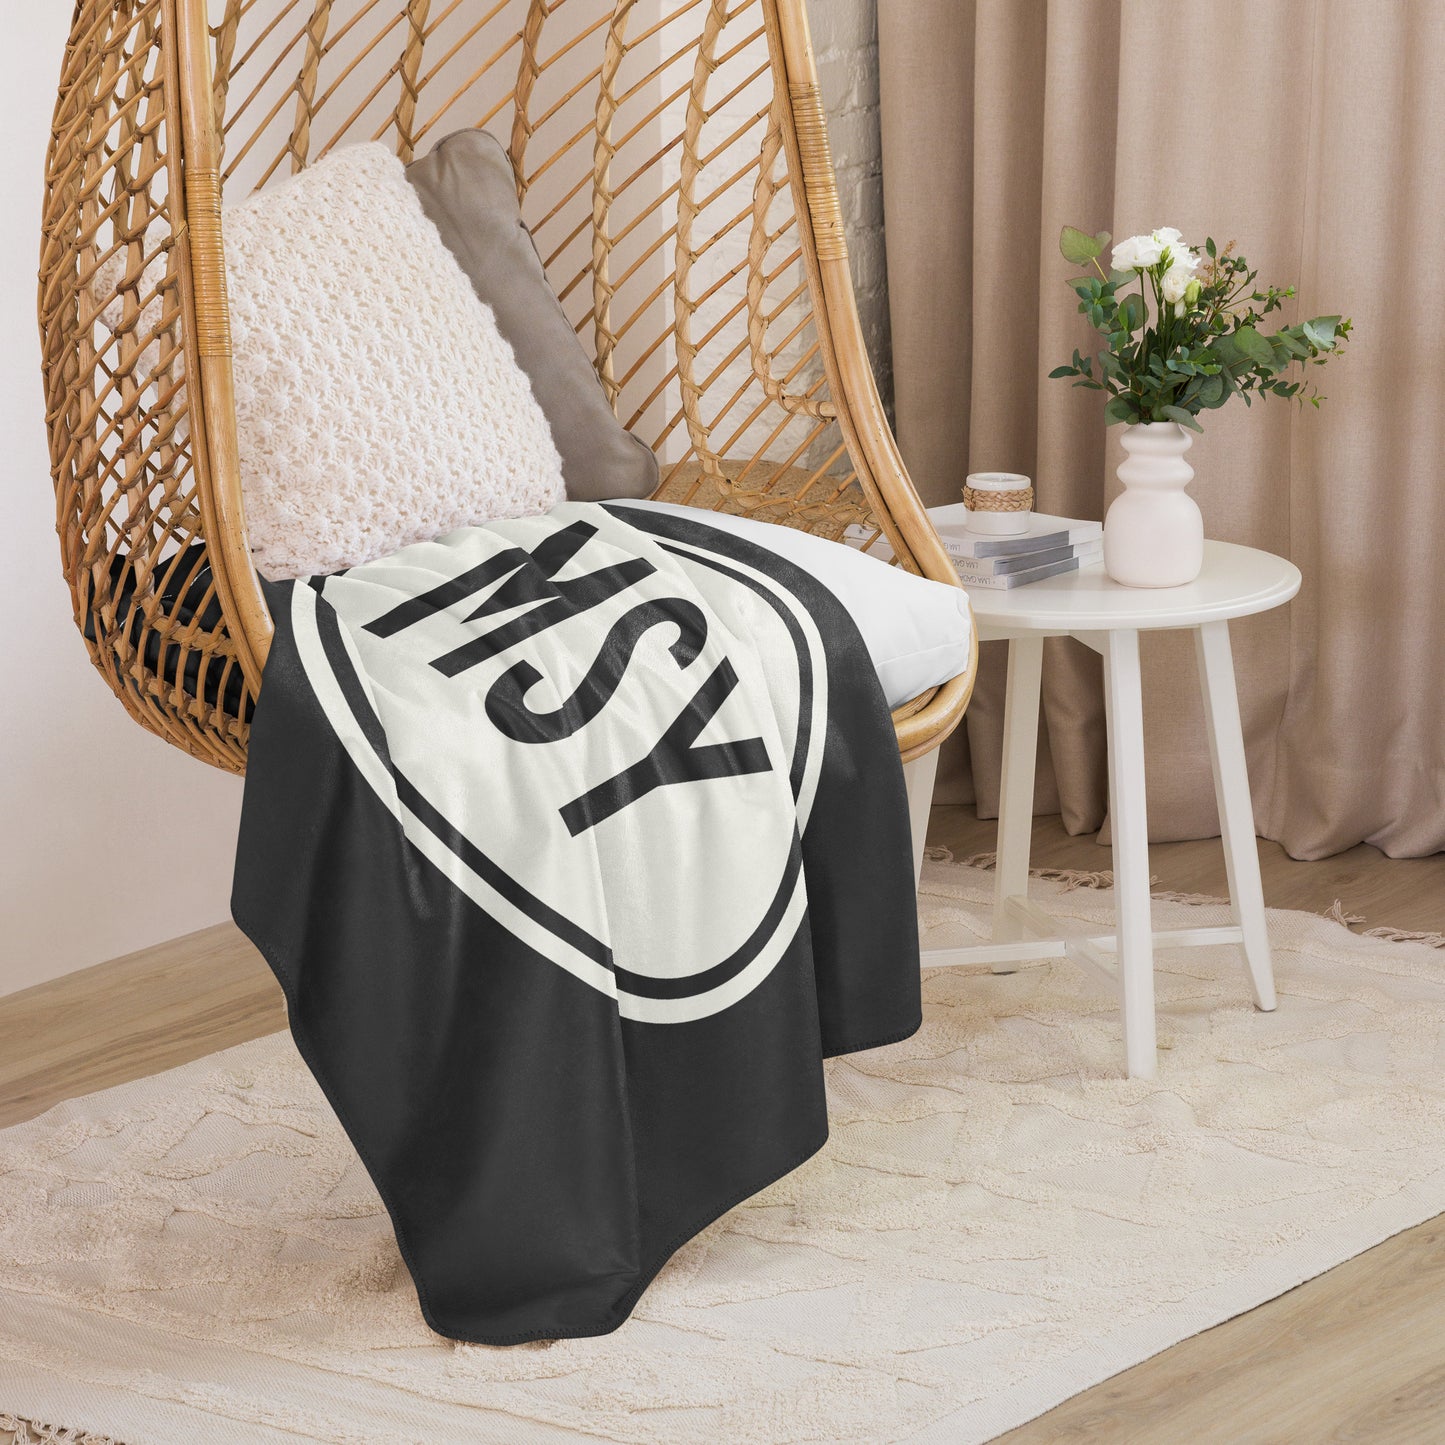 Unique Travel Gift Sherpa Blanket - White Oval • MSY New Orleans • YHM Designs - Image 06